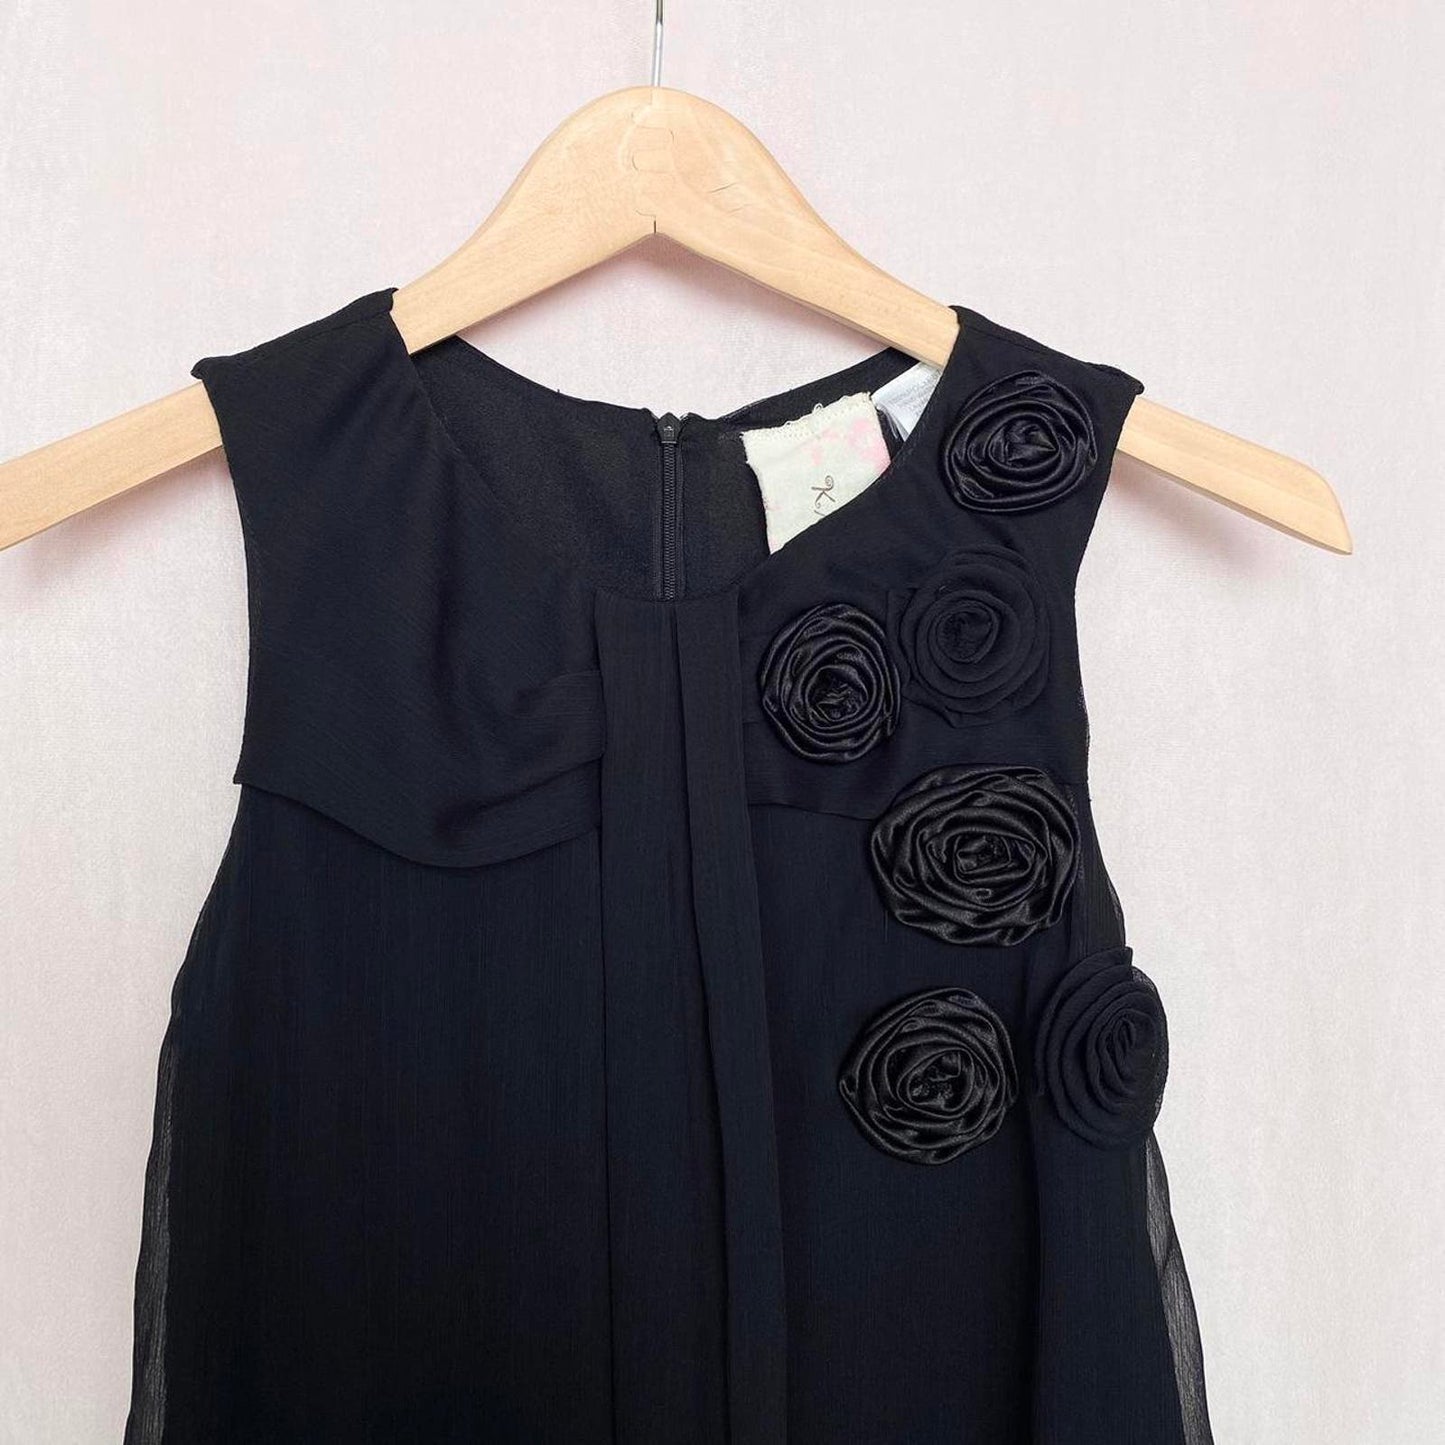 Preowned Black Satin Rose Embellished A-Line Mini Dress, Size Small